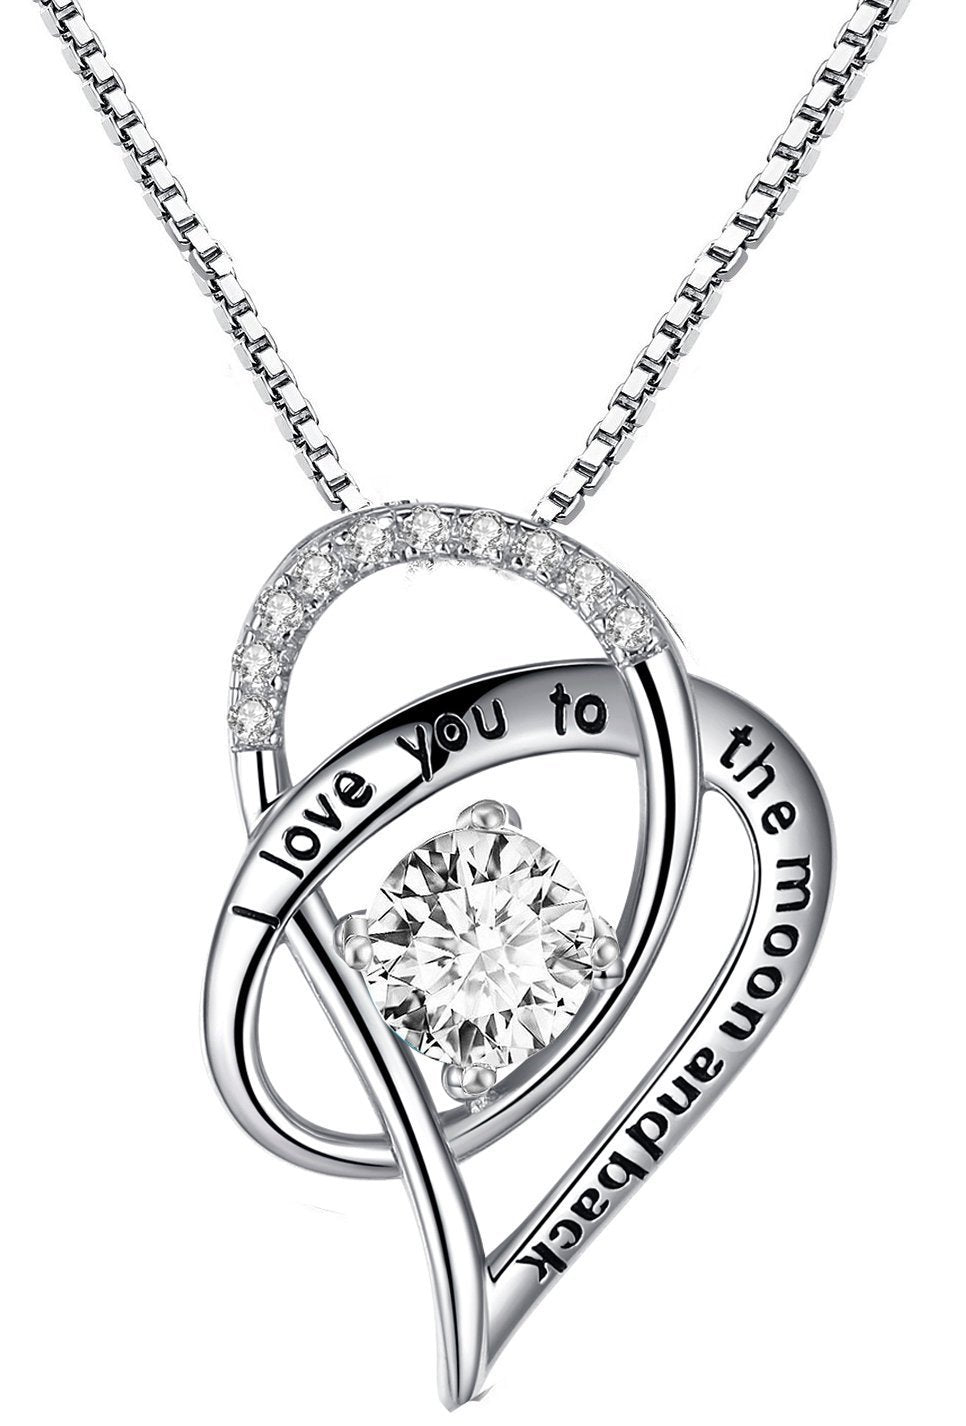 [Australia] - Sterling Silver"I Love You To The Moon and Back" Engraved Love Heart Pendant Necklace - White 